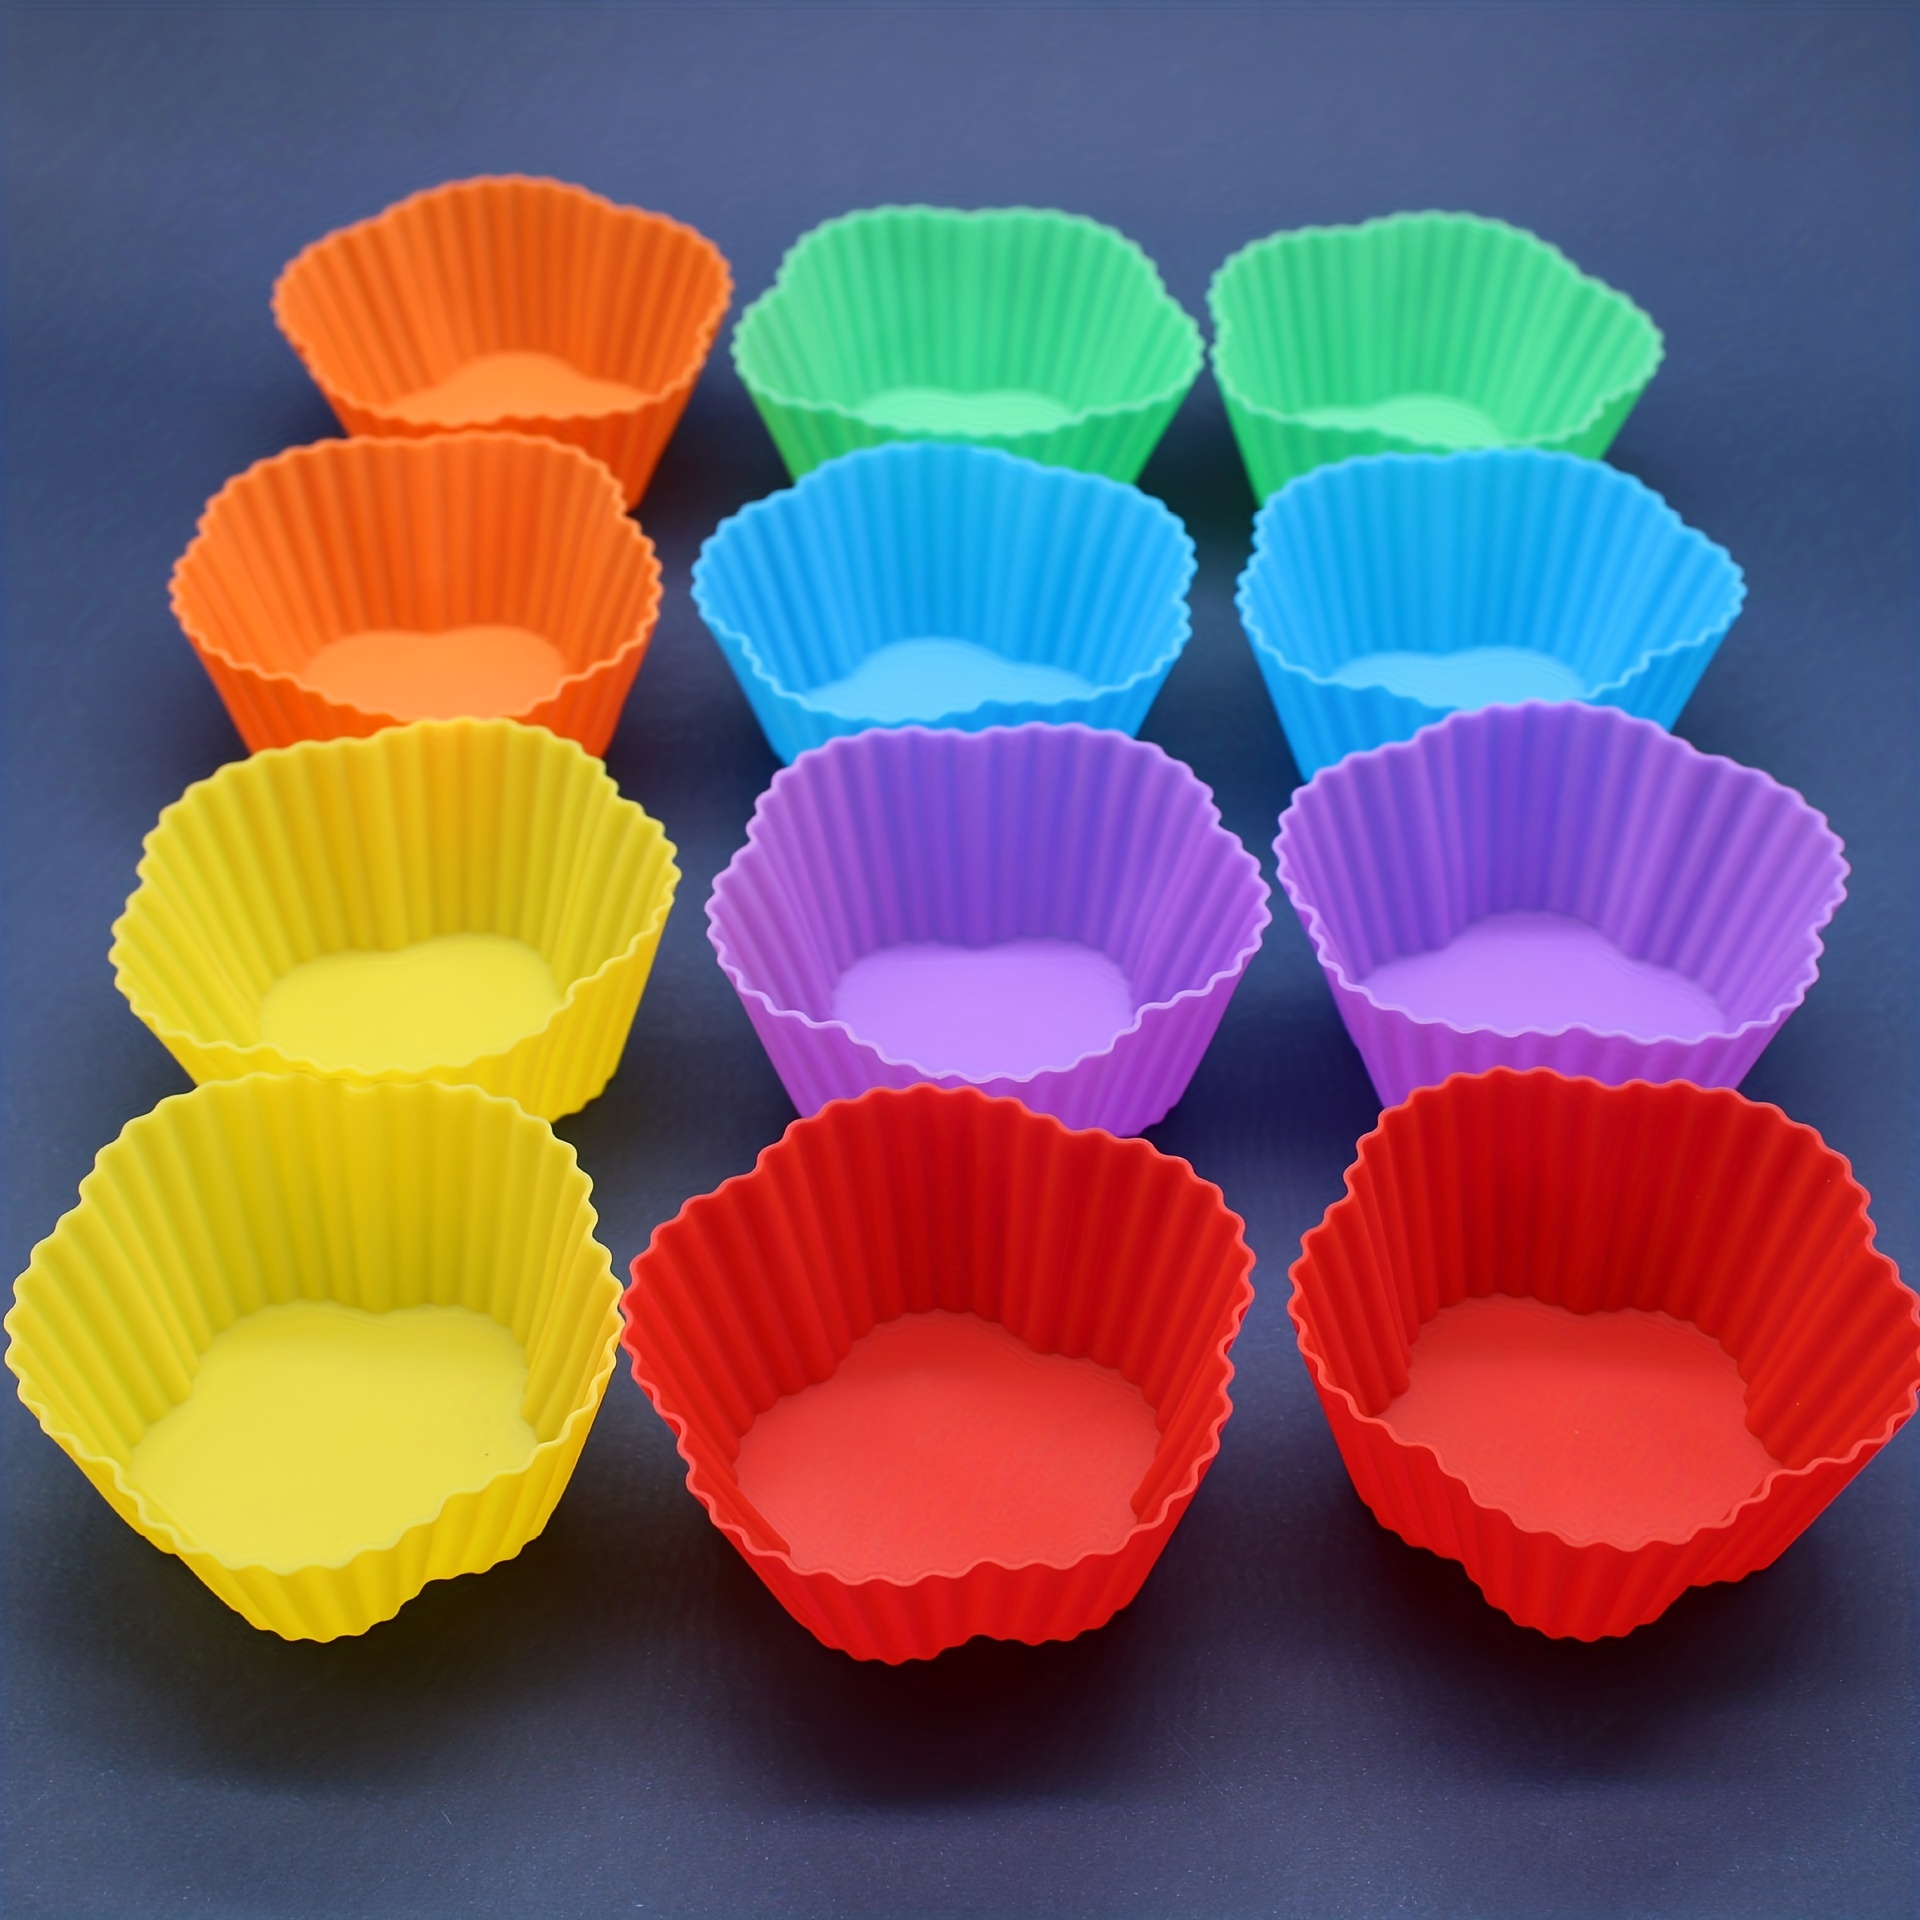 12pcs/pack 7cm Silicone Cupcake Mold For Baking Muffins & Cakes